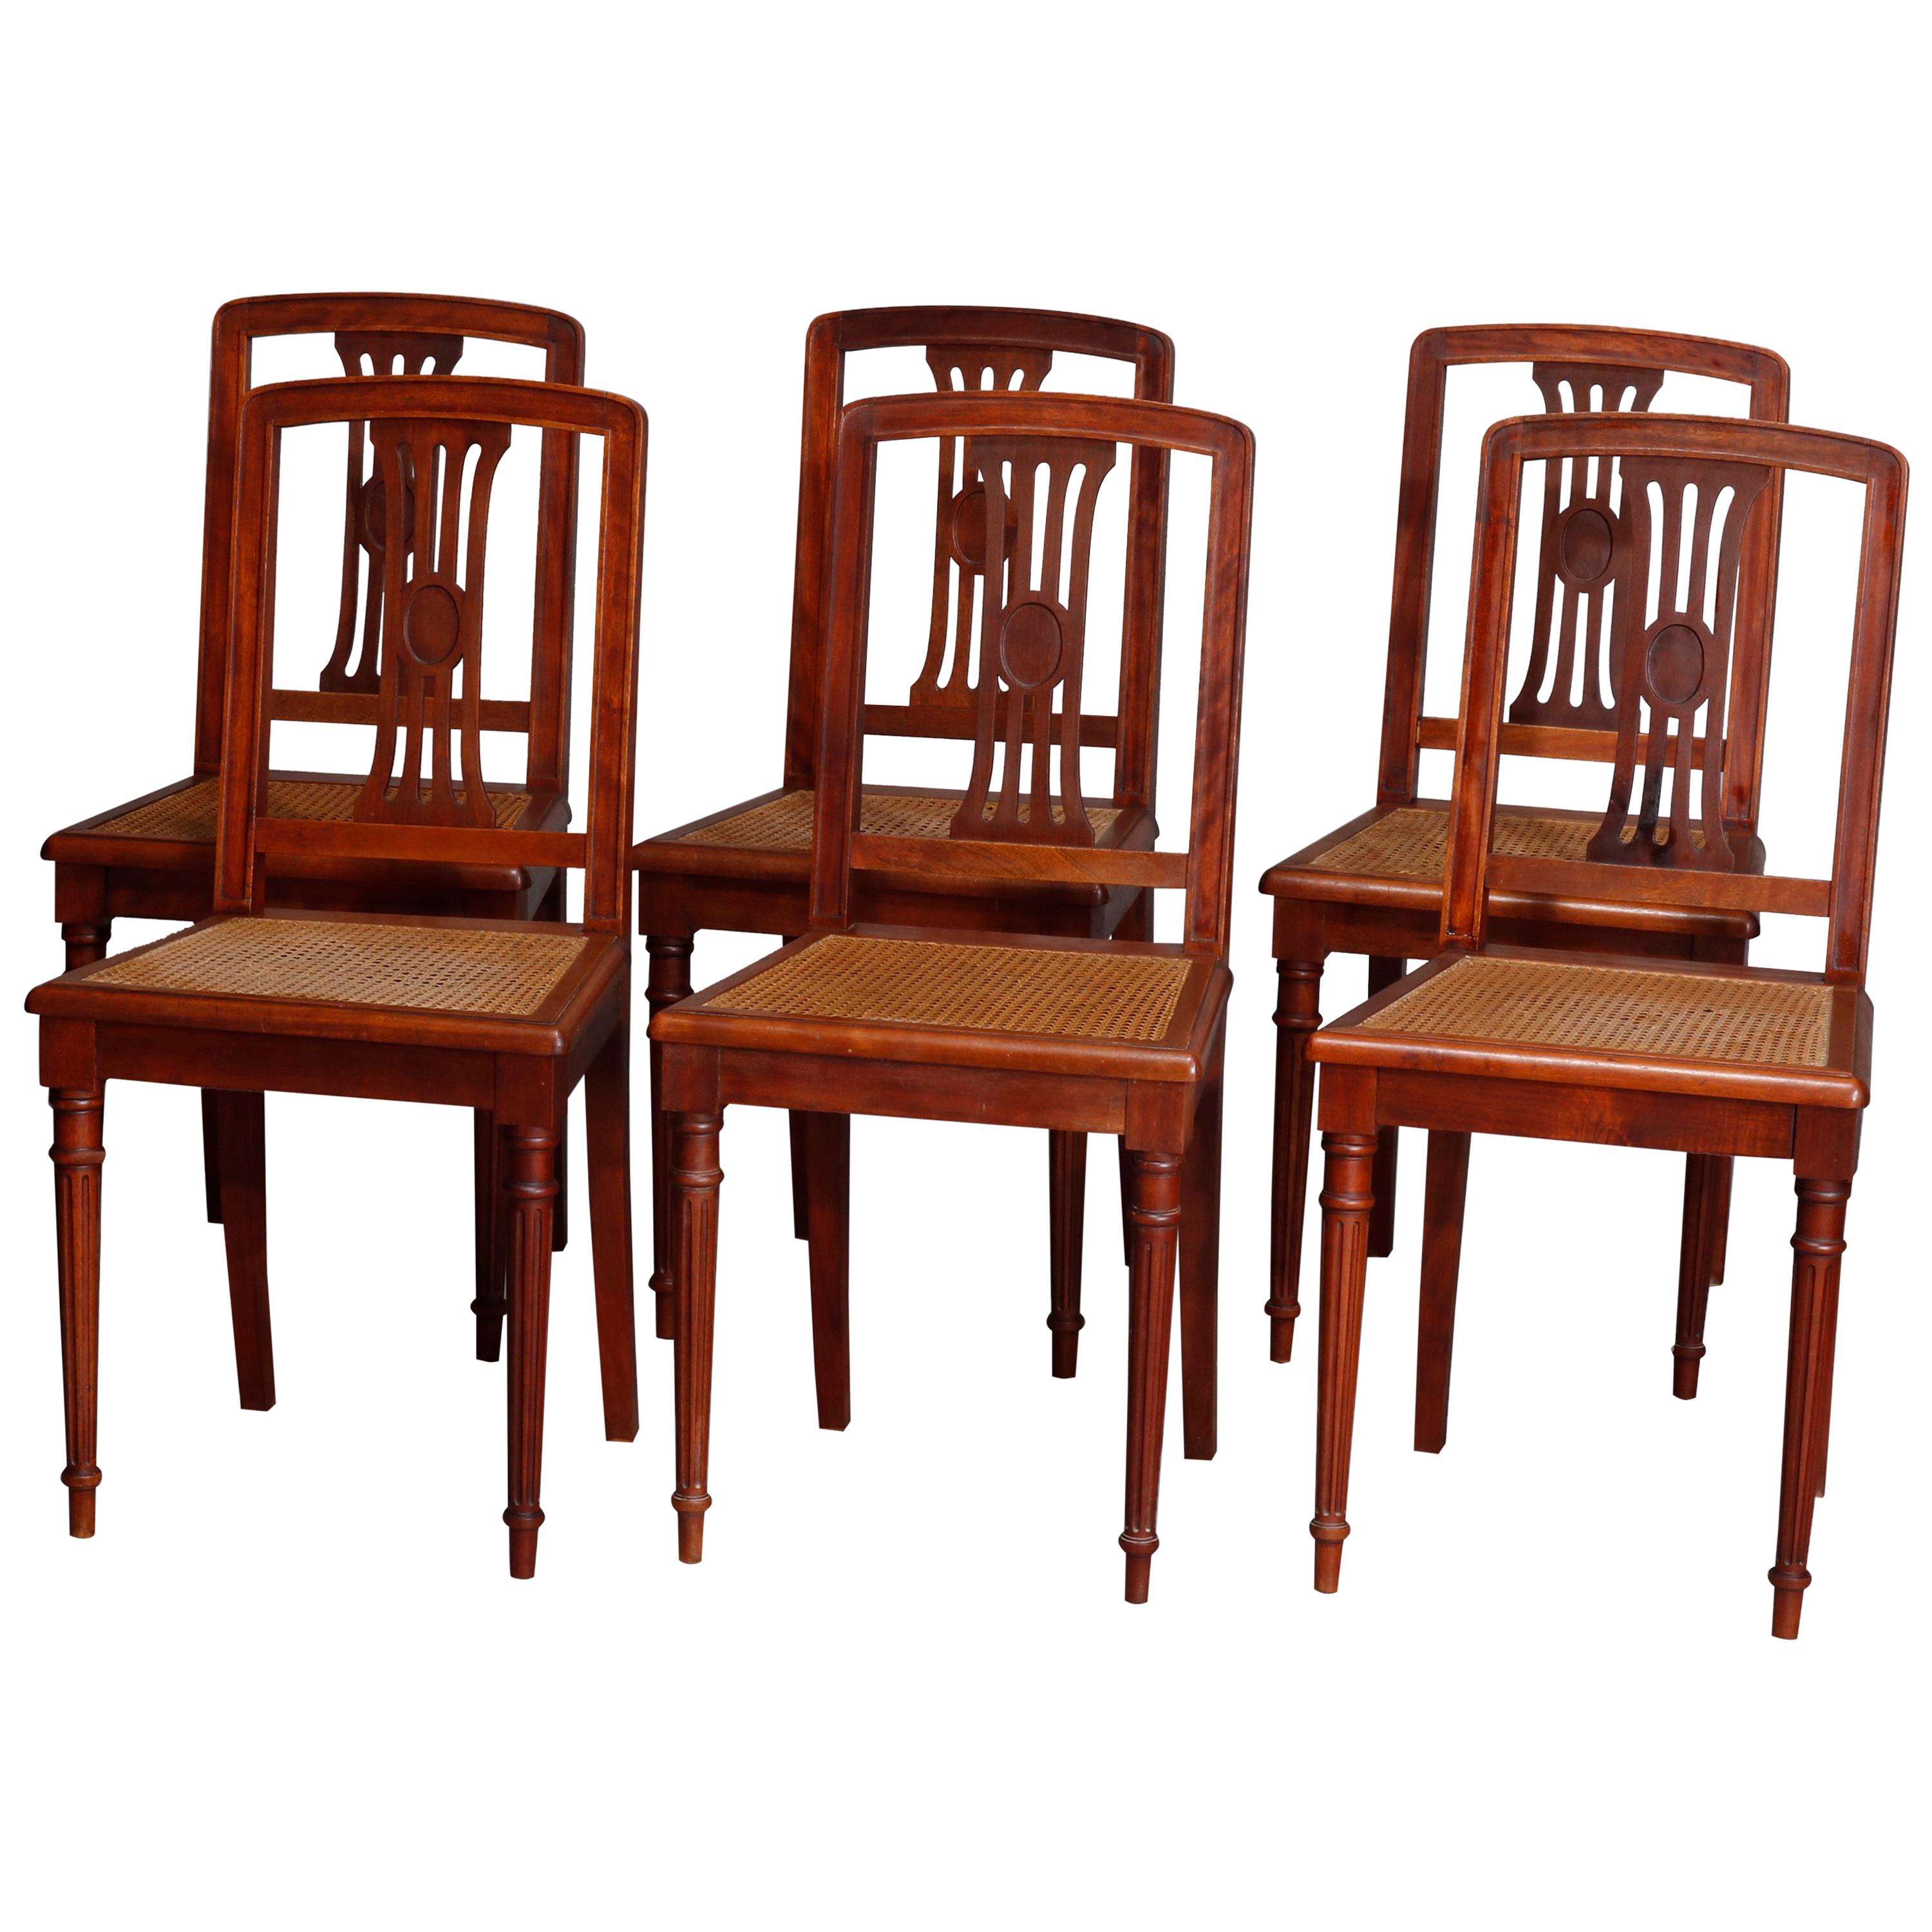 Six Antique French Louis XVI Mahogany Cane Seat Chairs, Early 20th Century For Sale